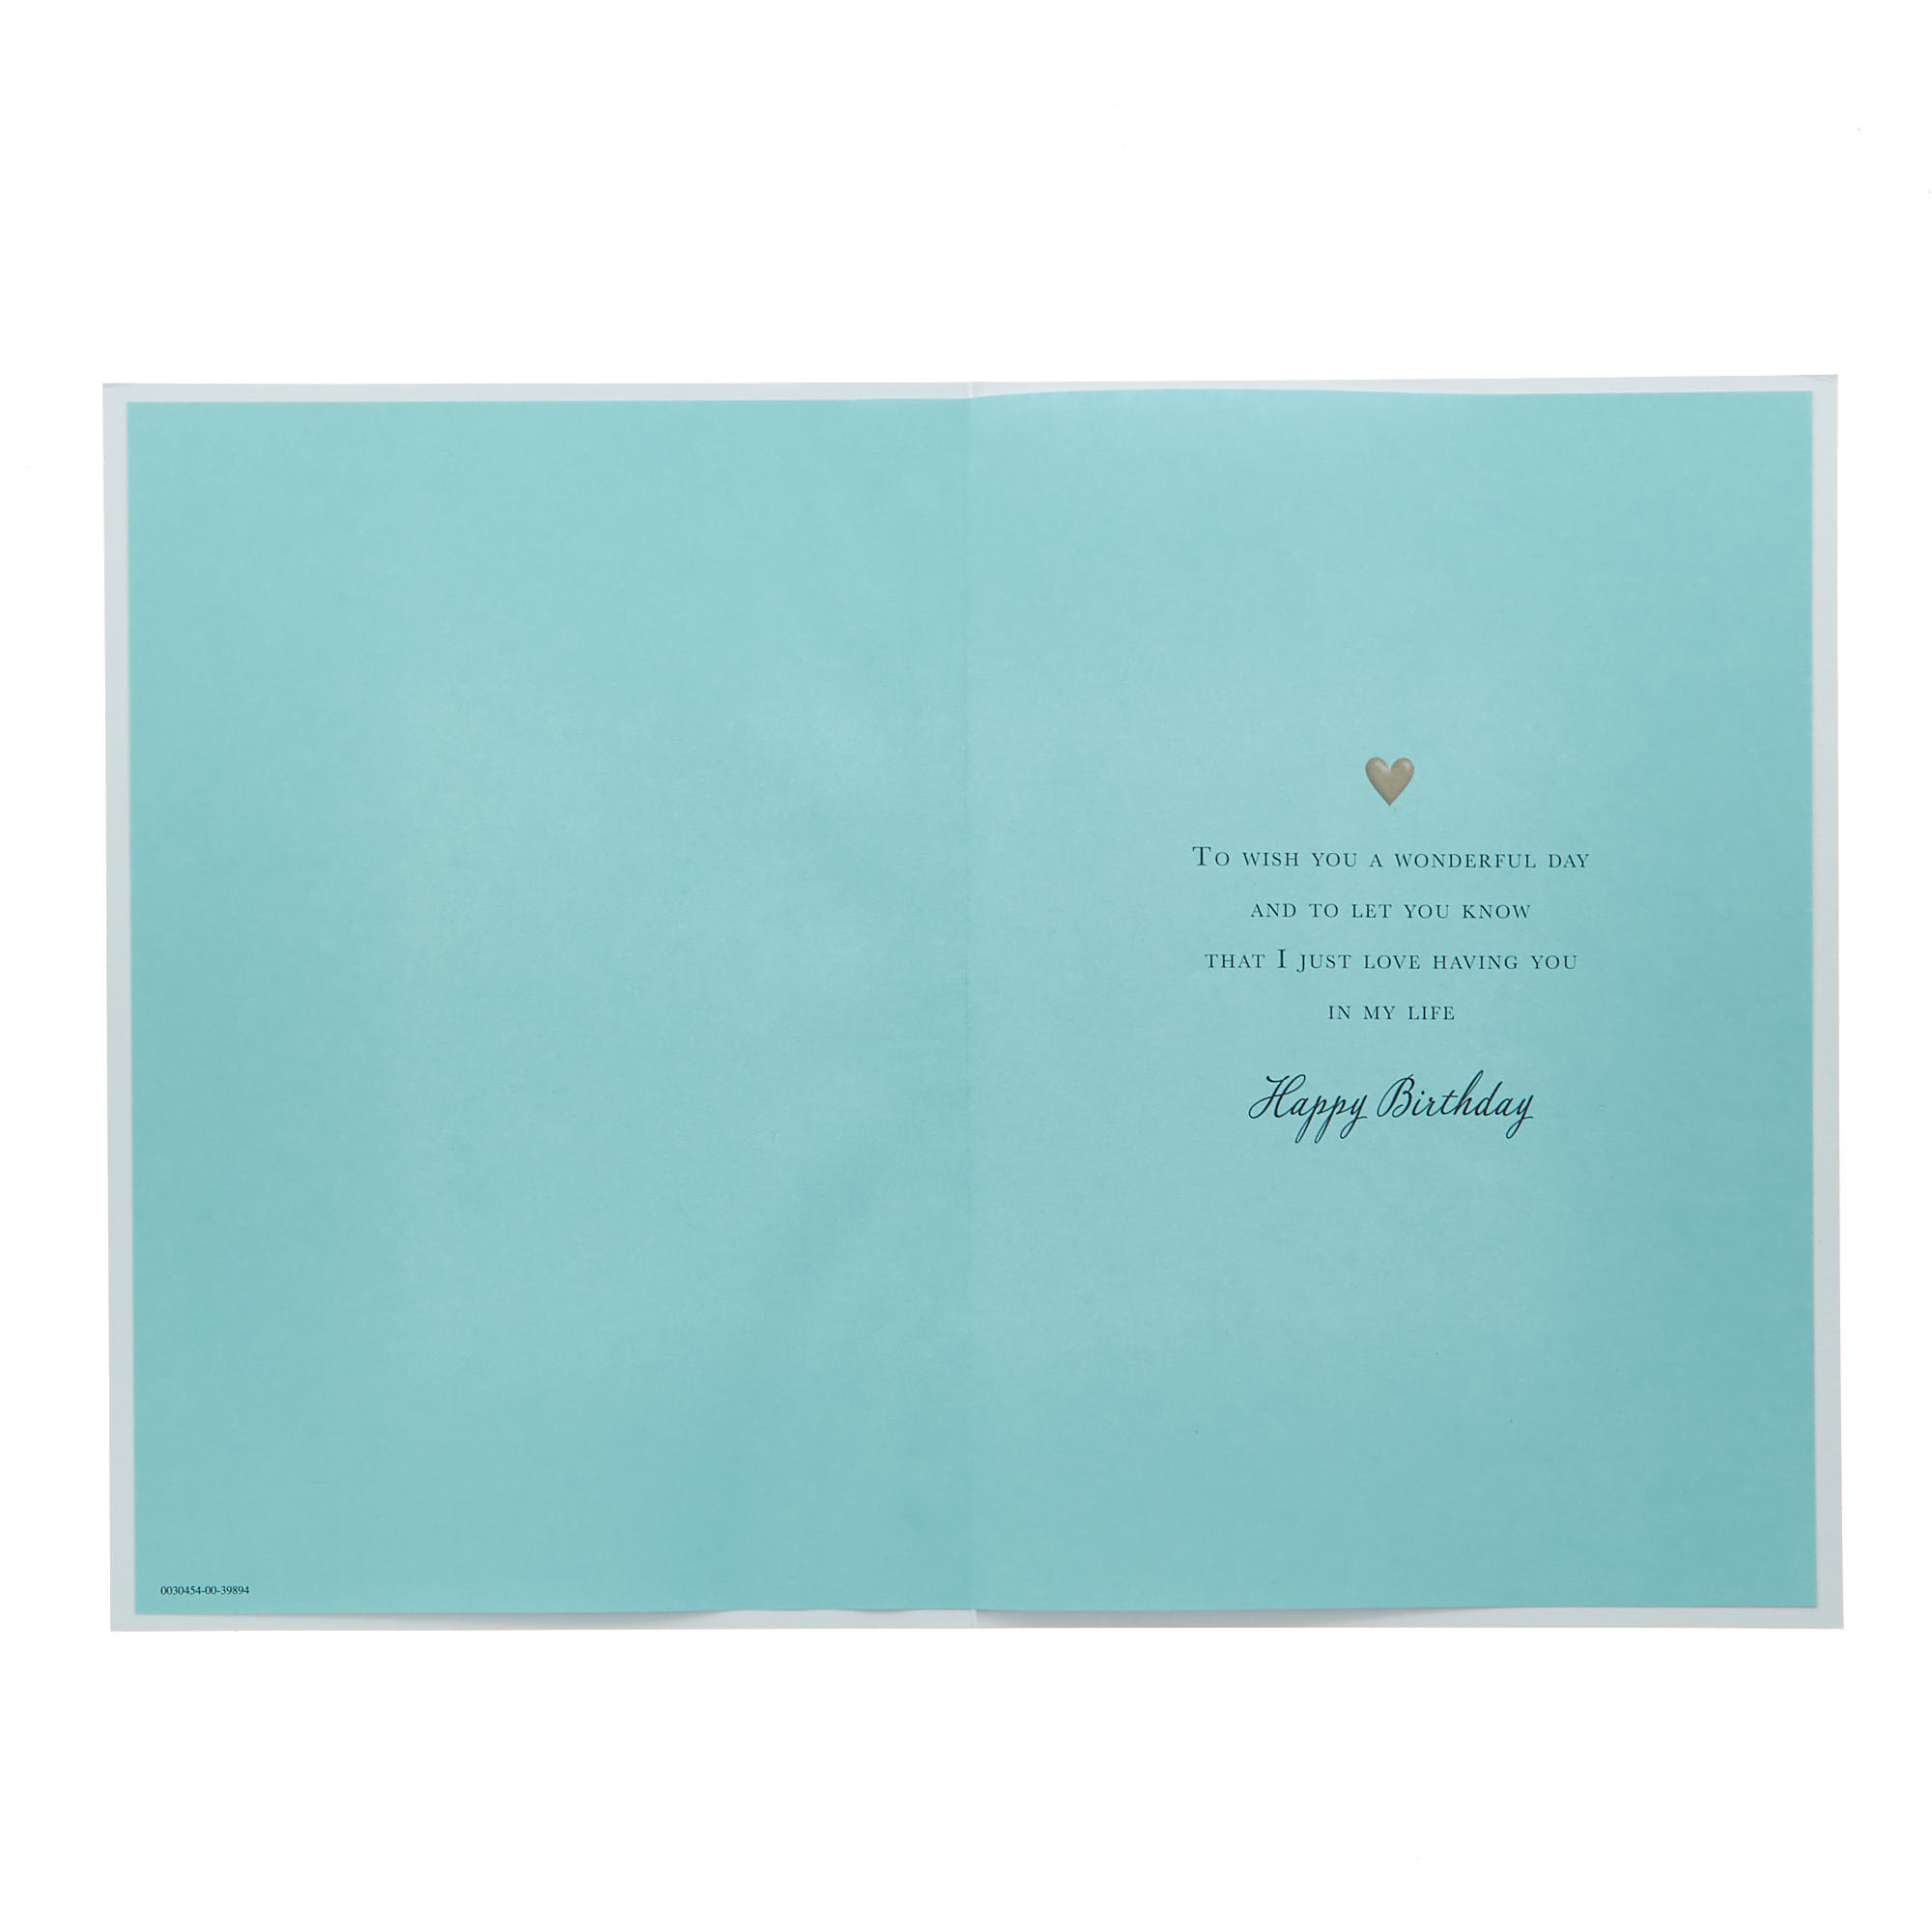 Birthday Card - Sending Wishes To Someone Special